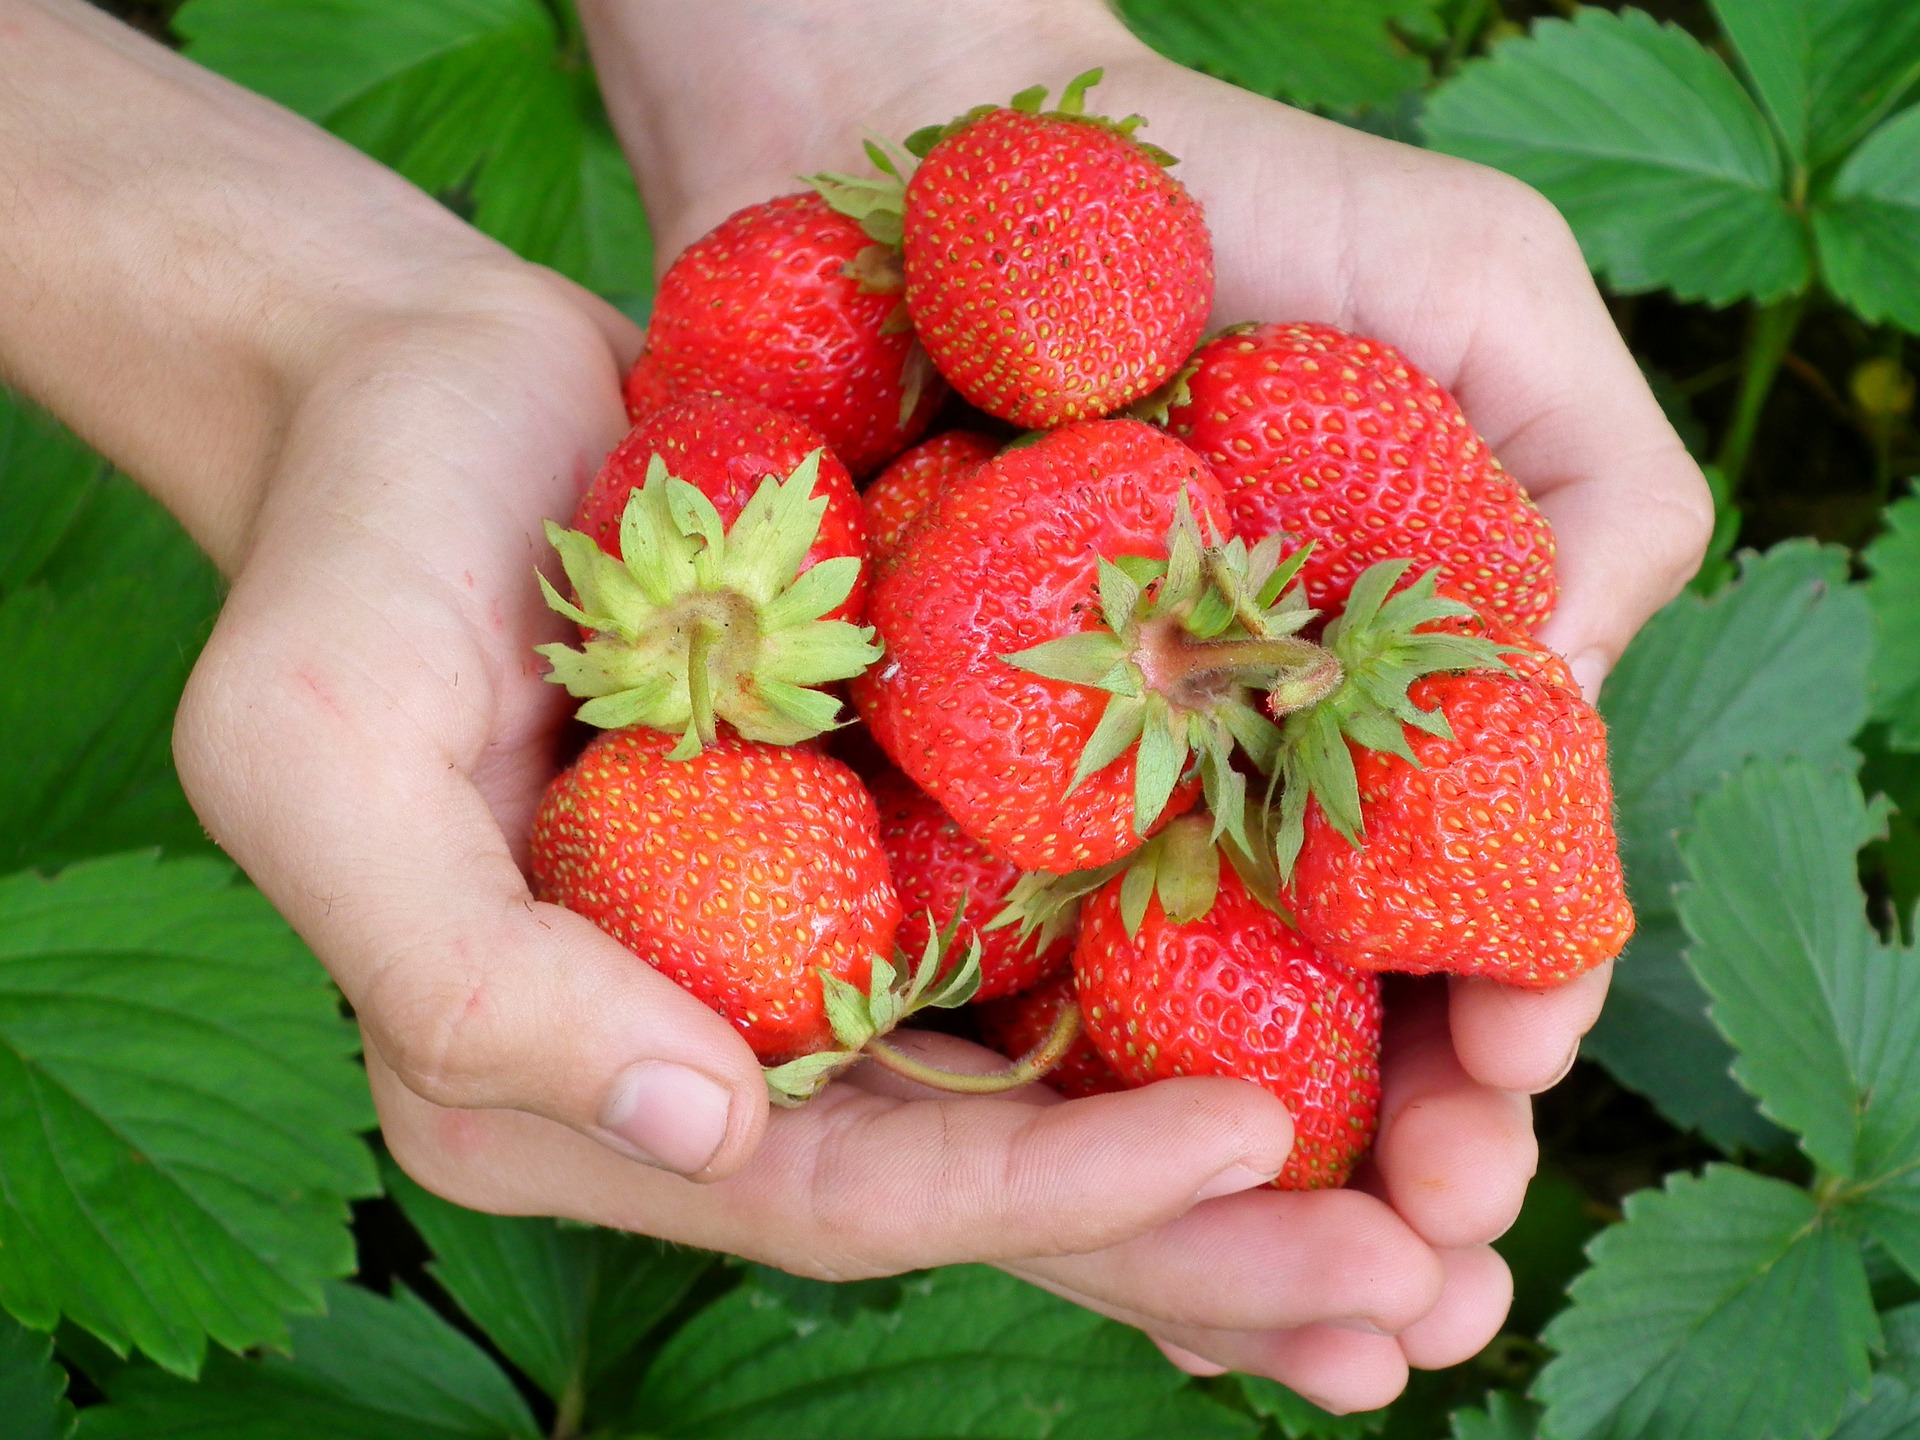 How This City Council Staff Innovated Urban Strawberry Farming For Growth In Hot Climate